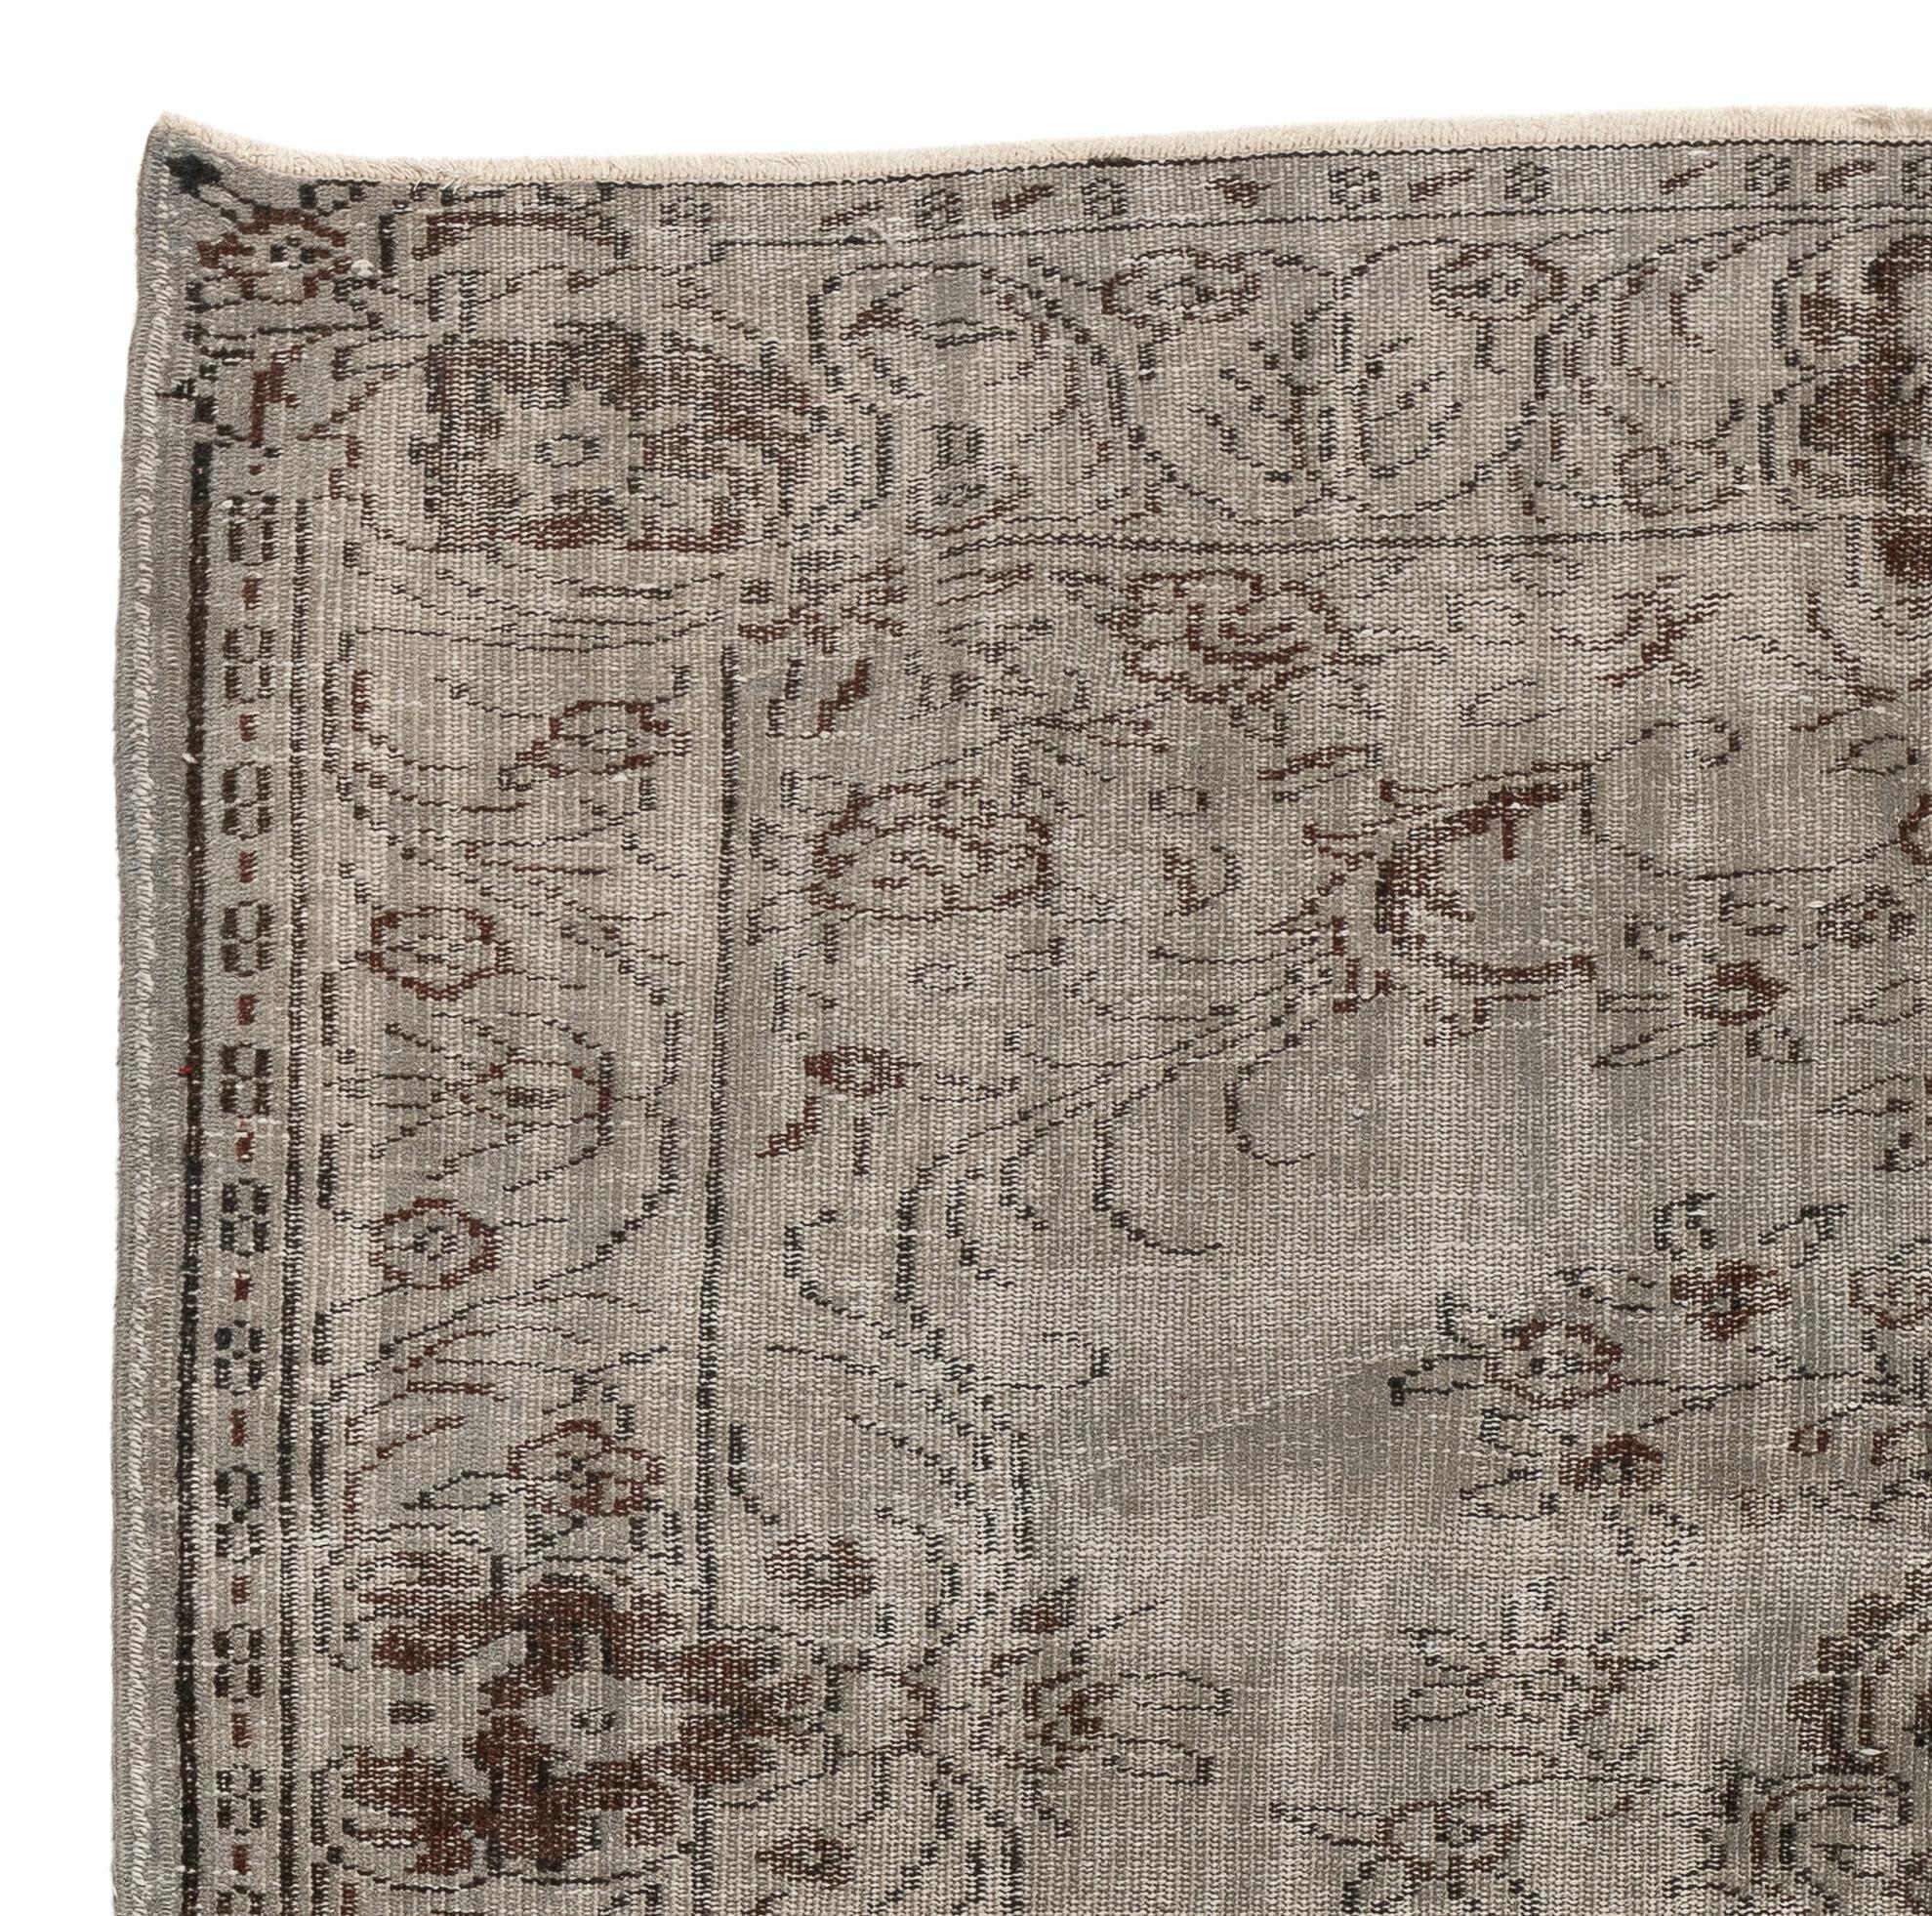 A vintage Turkish area rug re-dyed in gray color for contemporary interiors.
Finely hand knotted, low wool pile on cotton foundation. Professionally washed.
Sturdy and can be used on a high traffic area, suitable for both residential and